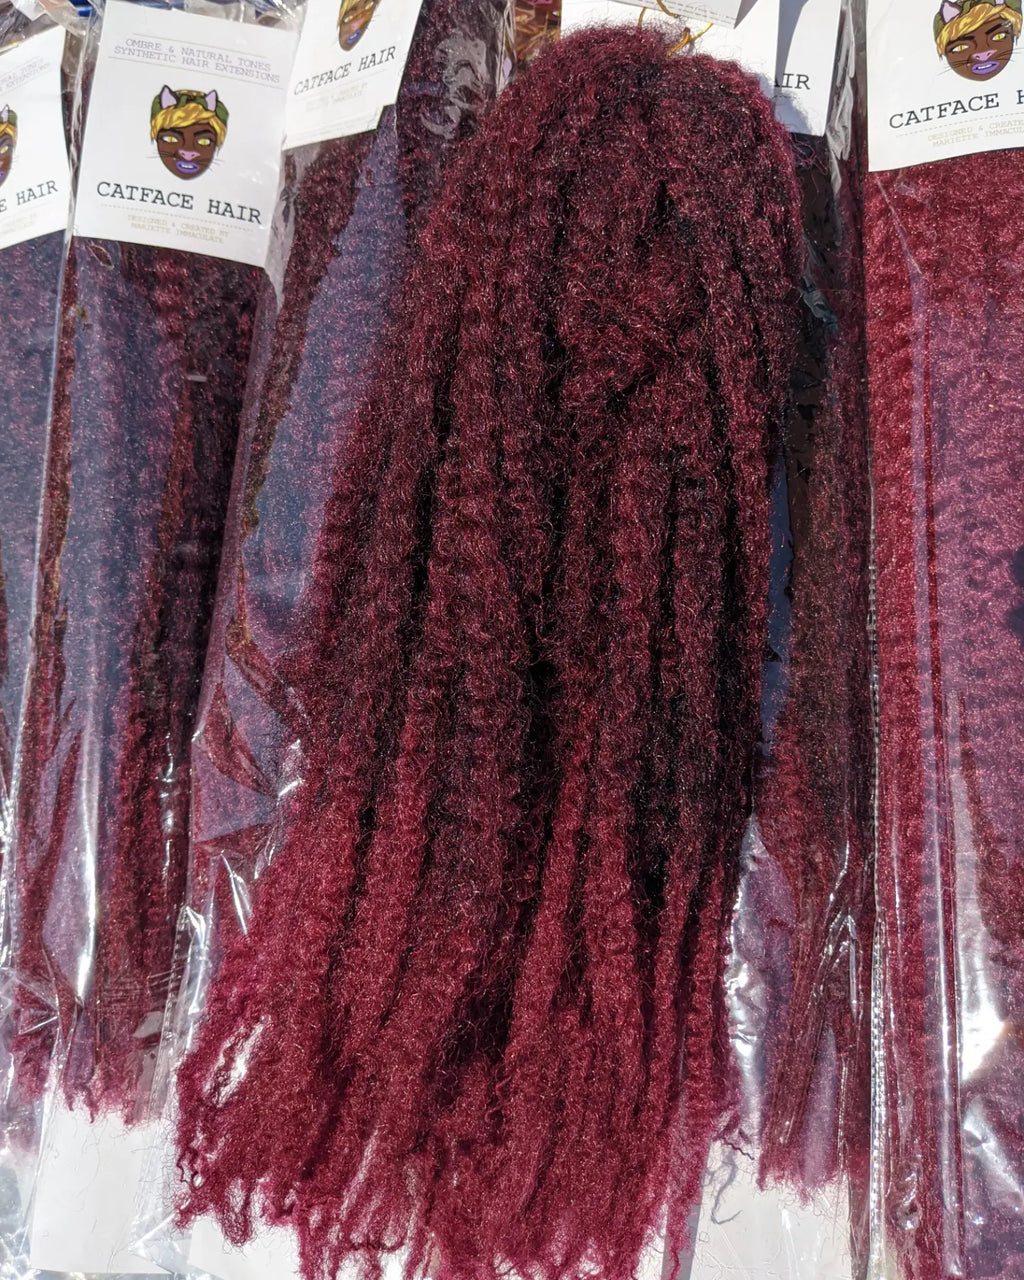 CATFACE MARLEY BRAID HAIR - BROWN AND BURGUNDY OMBRE | CROCHET BRAIDS | FAUX LOCS.